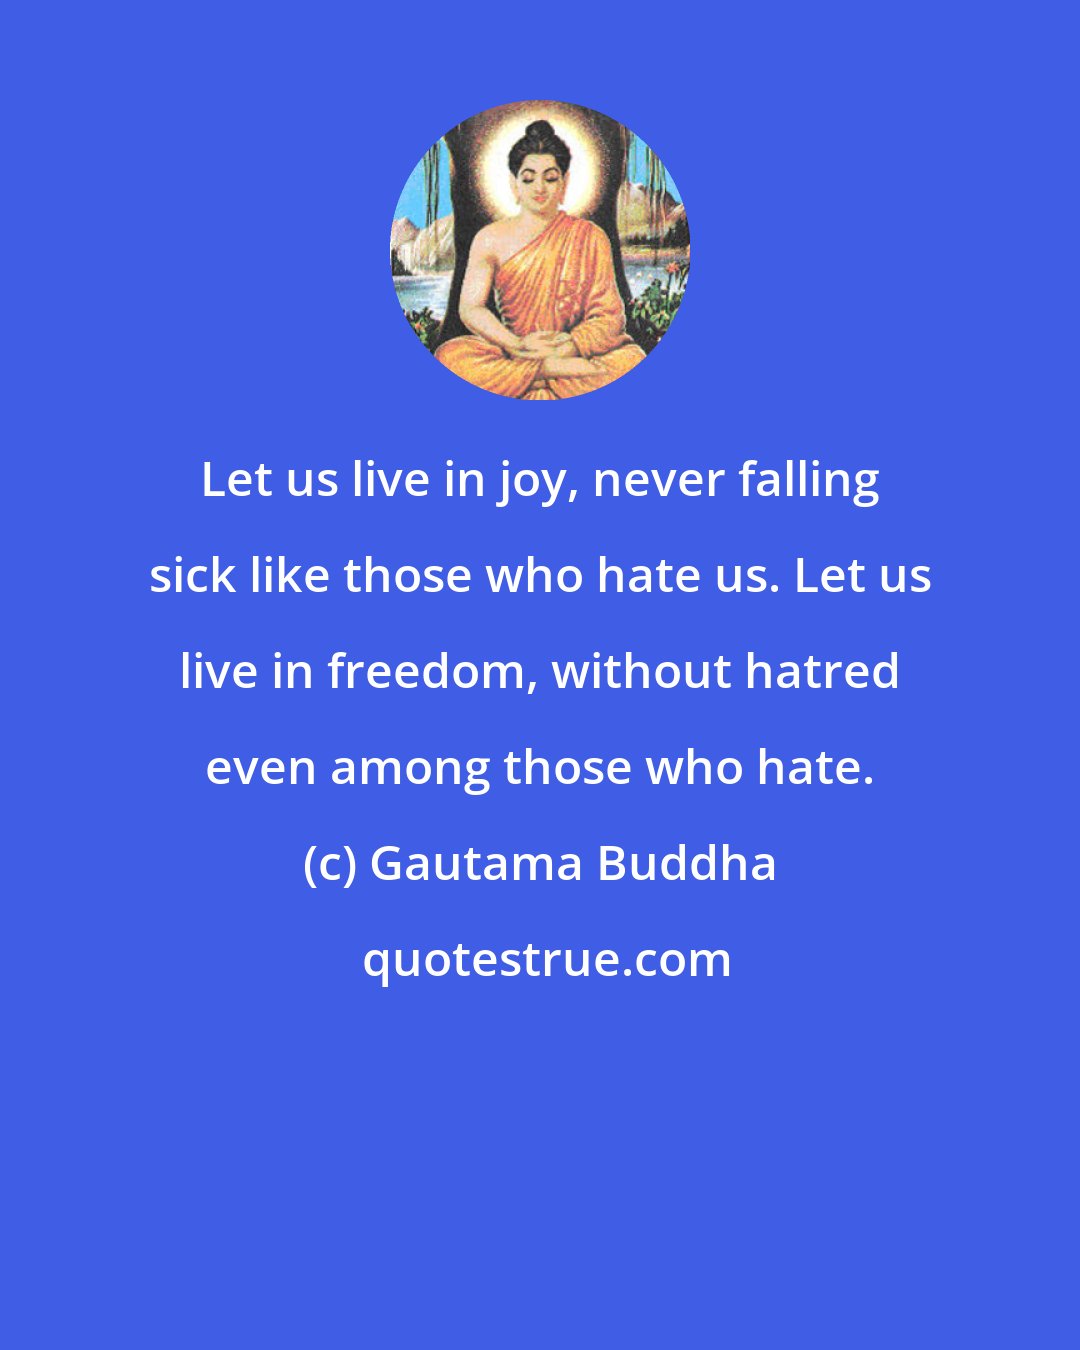 Gautama Buddha: Let us live in joy, never falling sick like those who hate us. Let us live in freedom, without hatred even among those who hate.